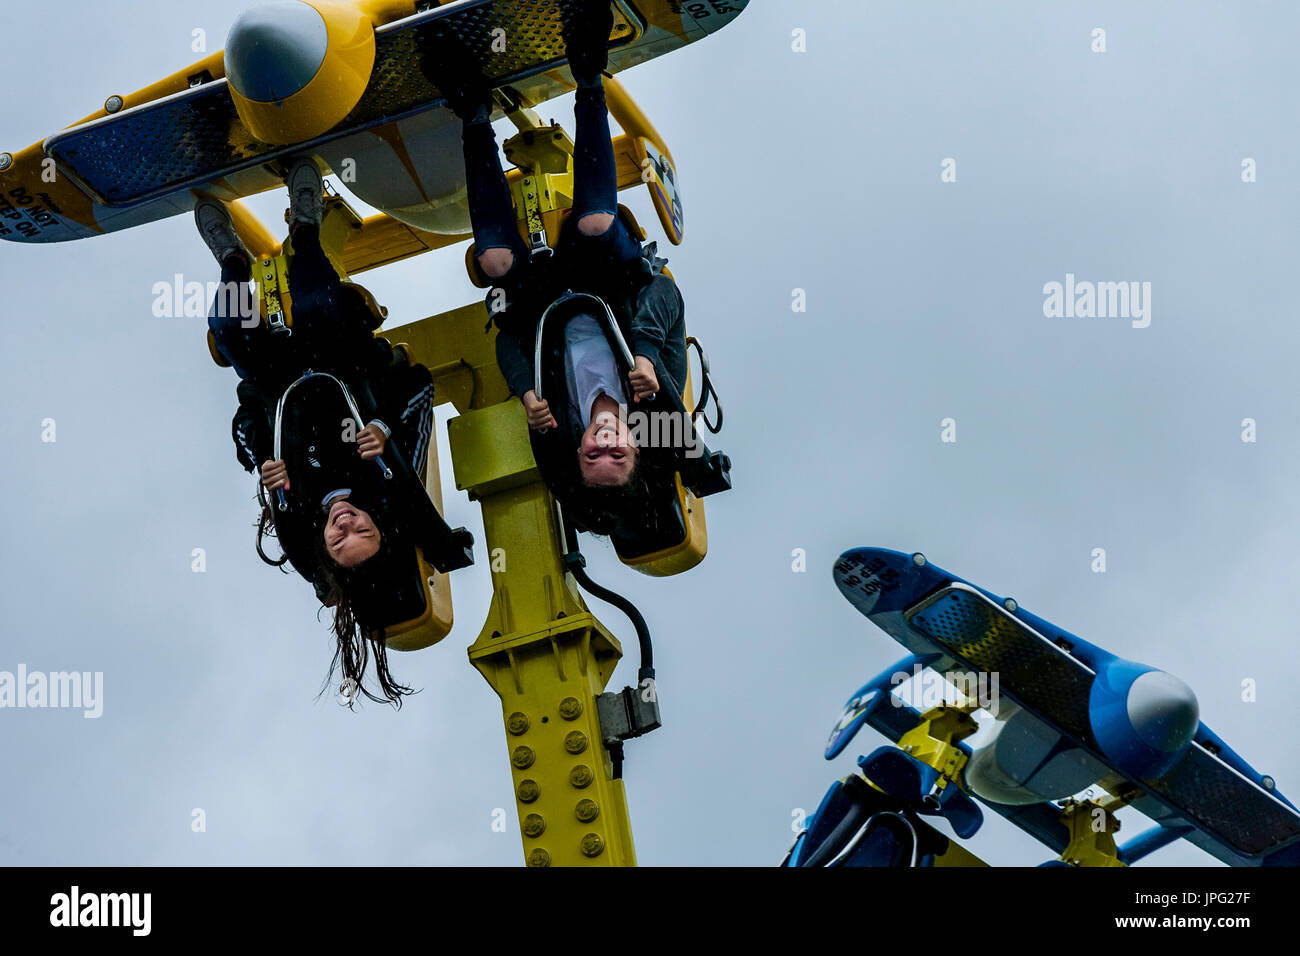 Brighton, UK. 2nd Aug, 2017. UK Weather. Two young women having fun on a fairground ride in the rain, Brighton Pier, Brighton, East Sussex, UK. Credit: Grant Rooney/Alamy Live News Stock Photo